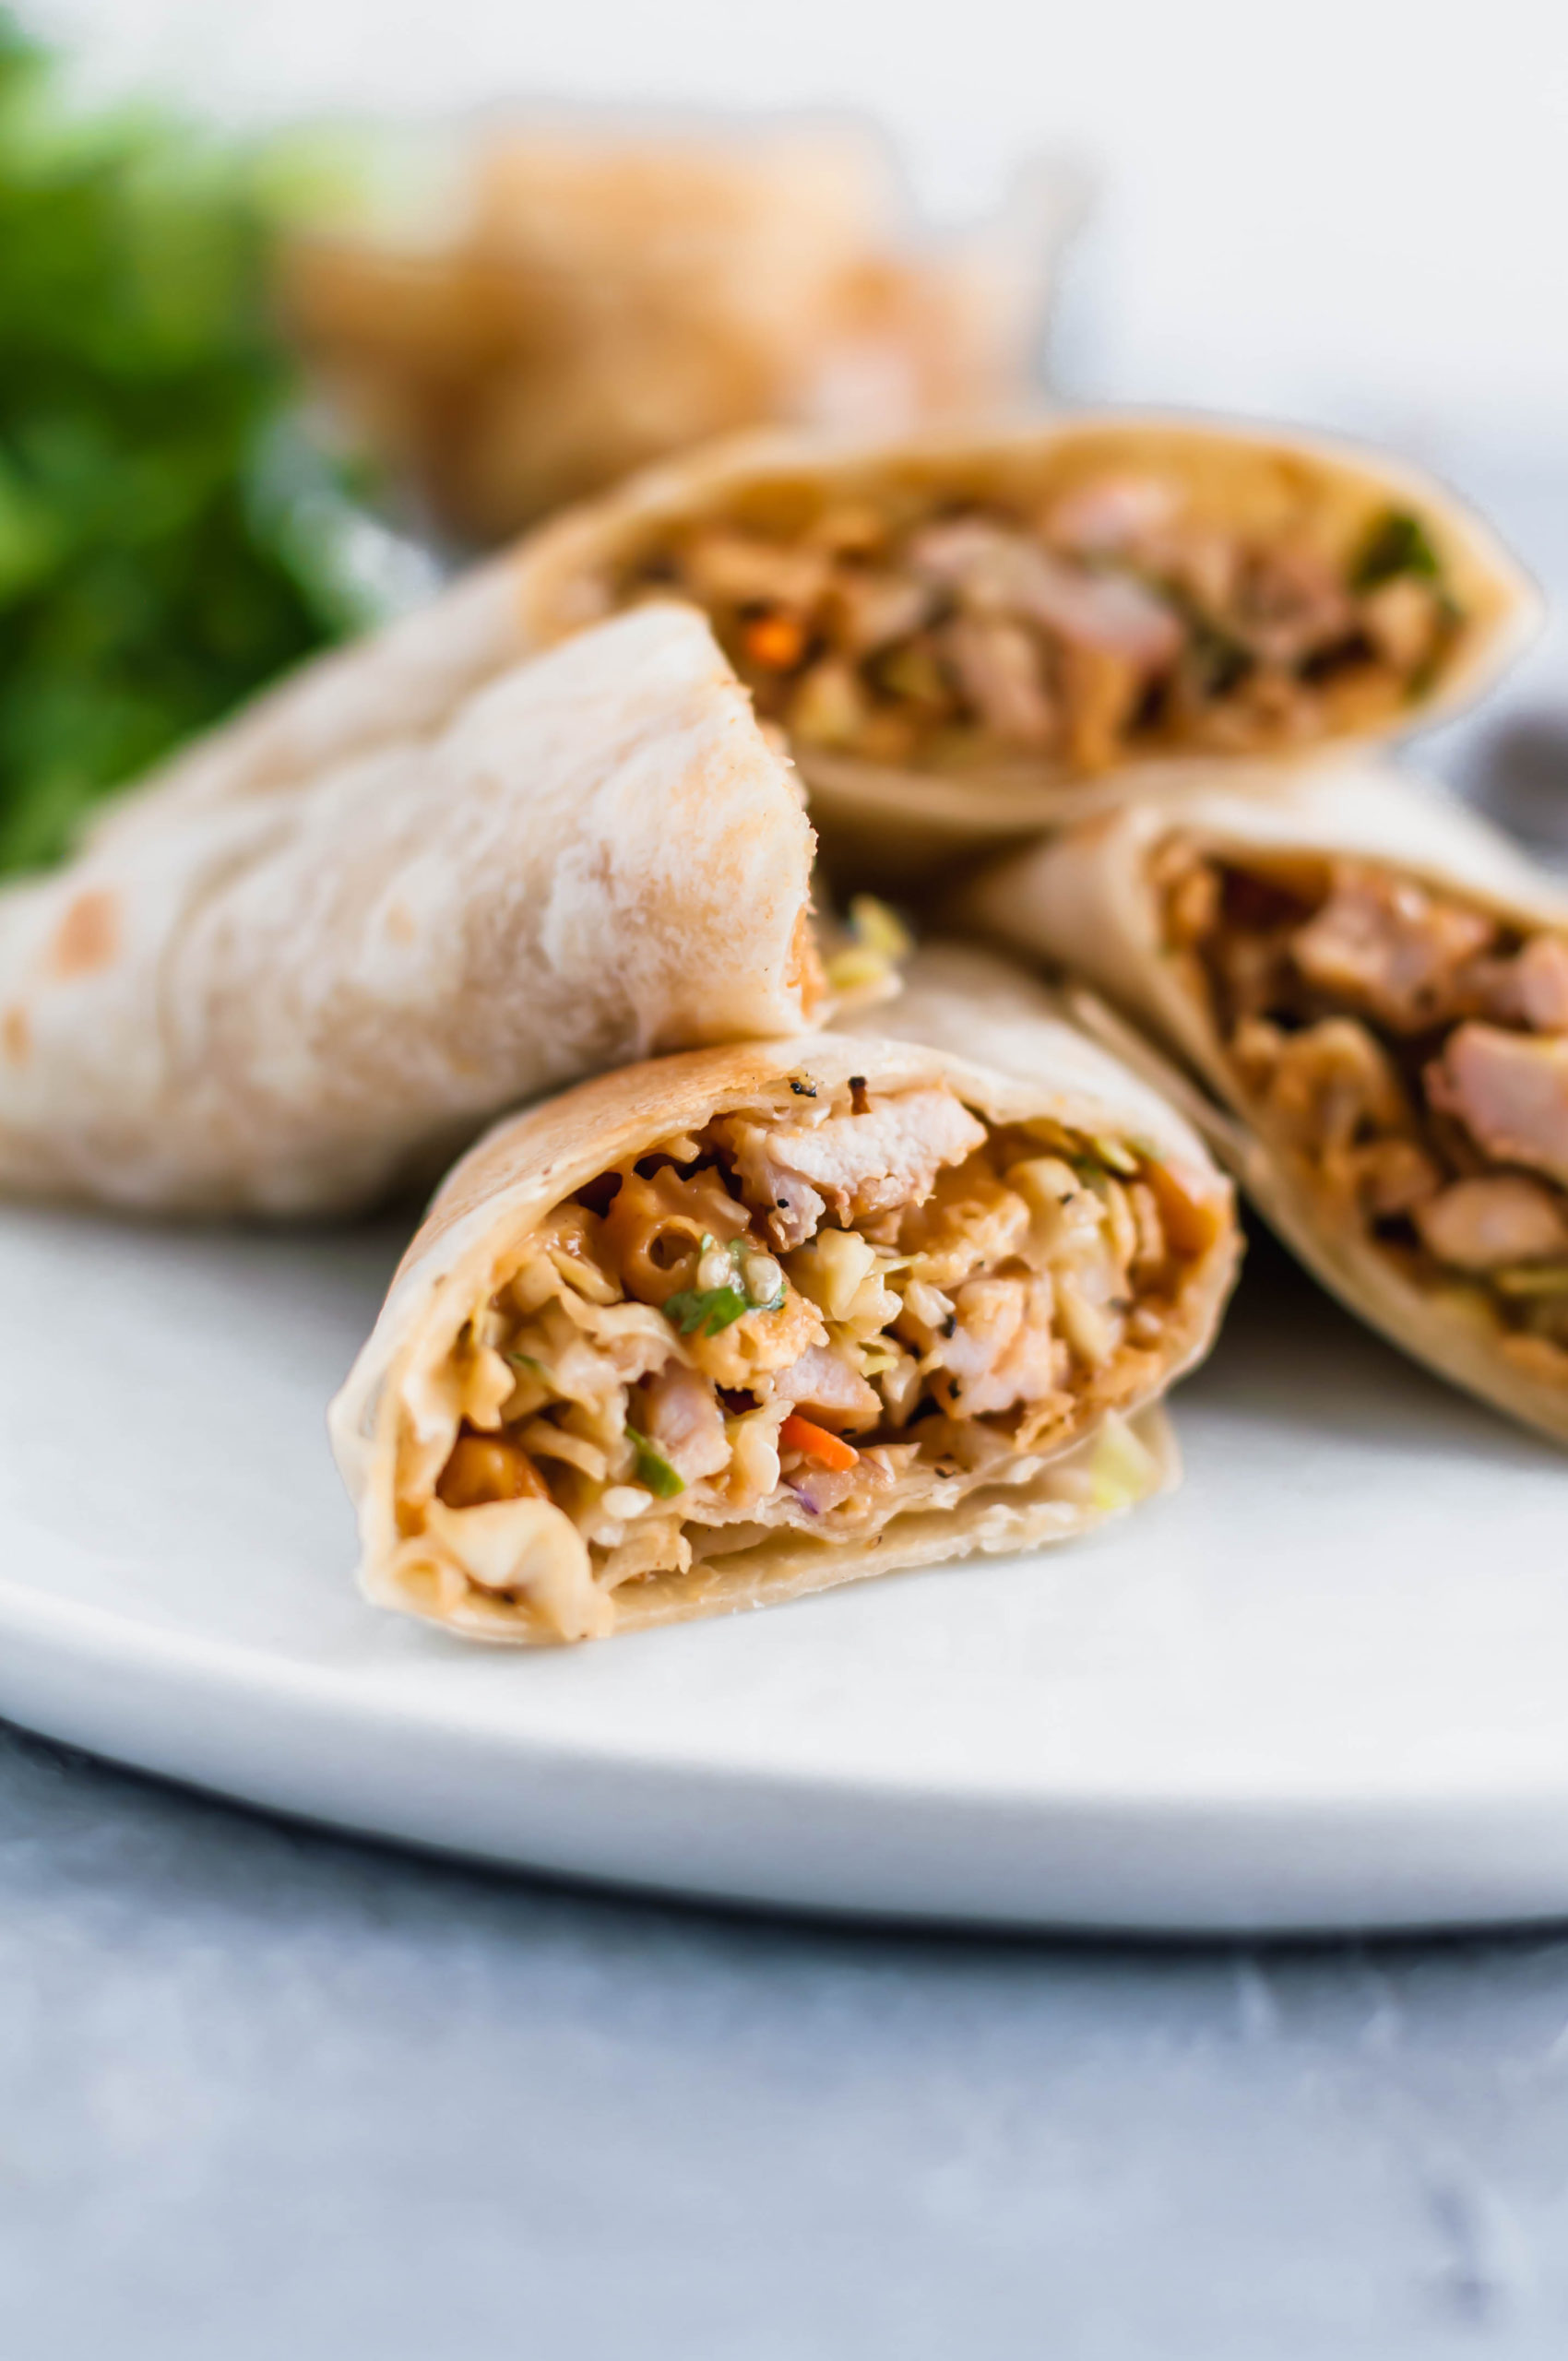 Thai Chicken Wraps will become your new summer go to meal. They are simple to make, packed with flavor and perfectly light.